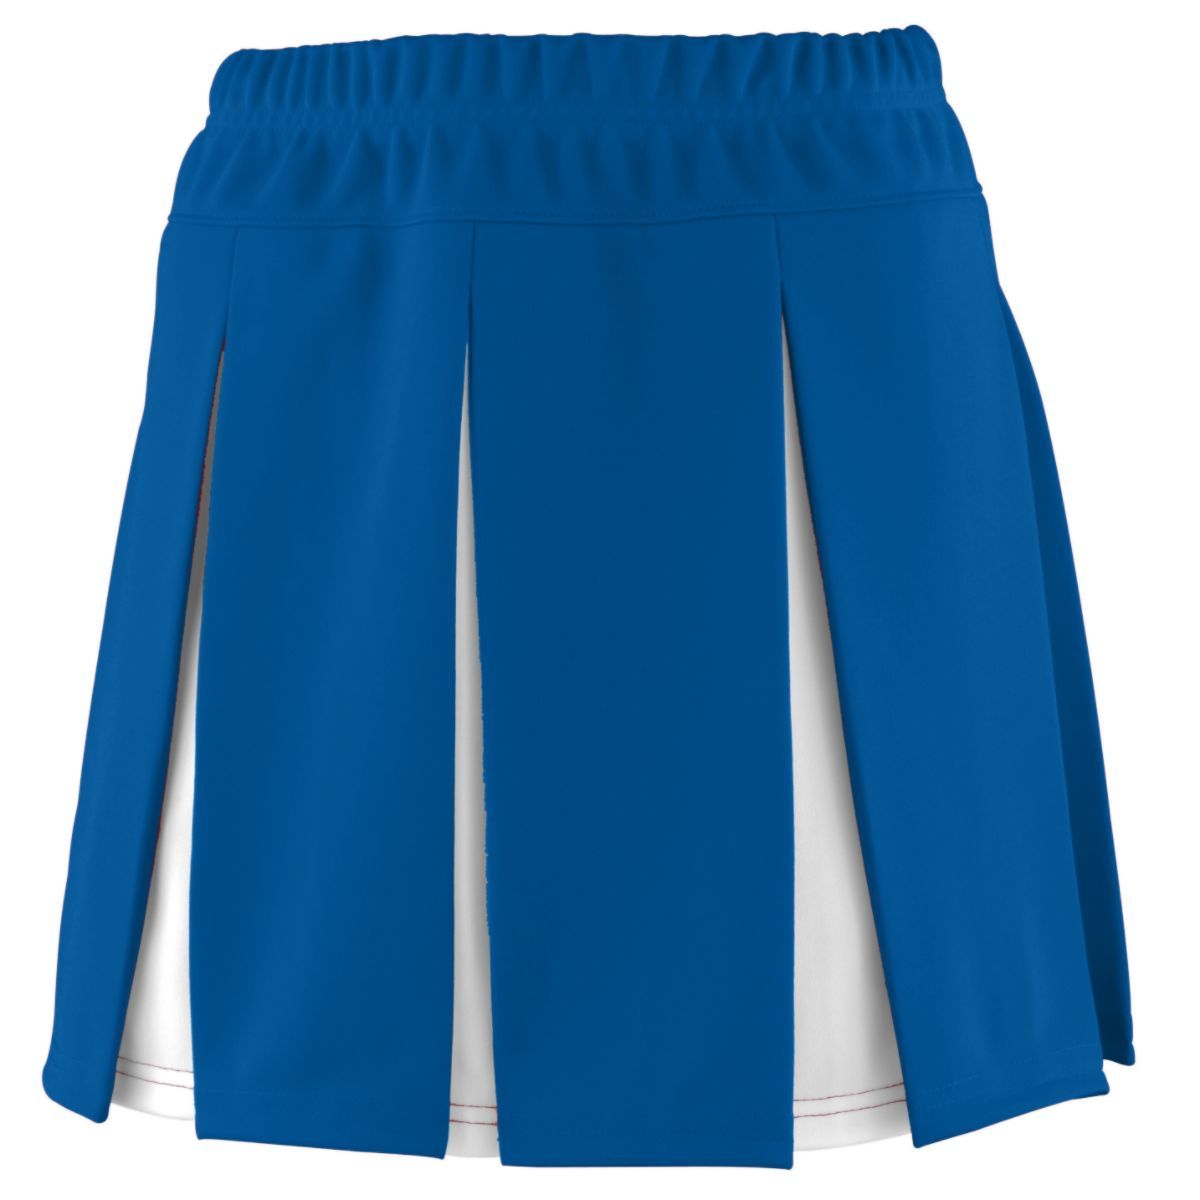 Augusta Sportswear Girls Liberty Skirt in Royal/White  -Part of the Girls, Augusta-Products, Cheer product lines at KanaleyCreations.com